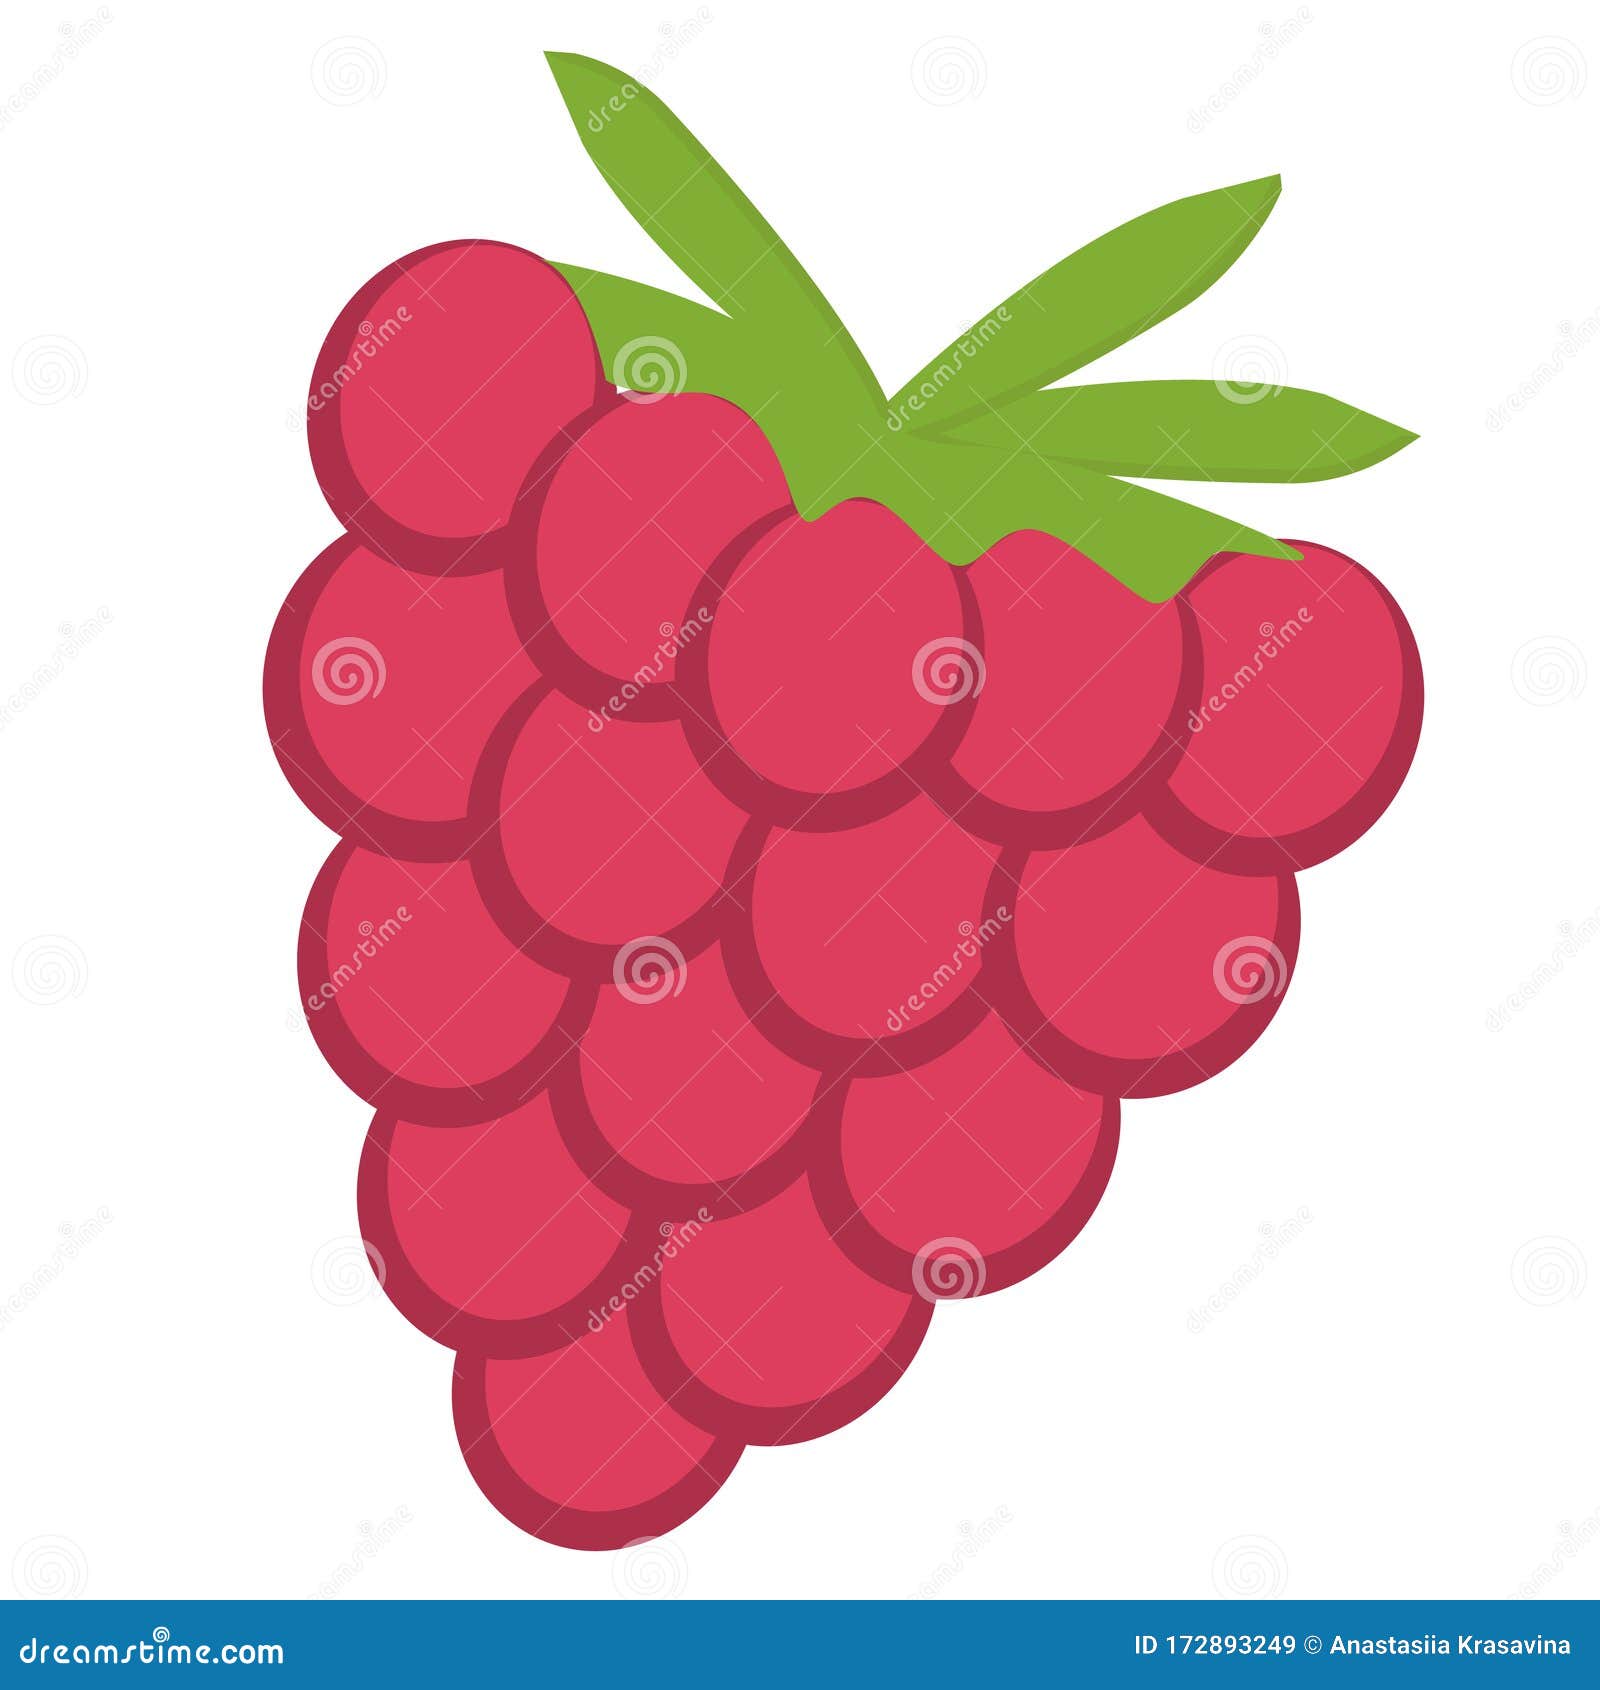 Raspberry with Leaf Vector Icon. Raspberry Icon Clipart. Raspberry Cartoon  Stock Illustration - Illustration of organic, collection: 172893249